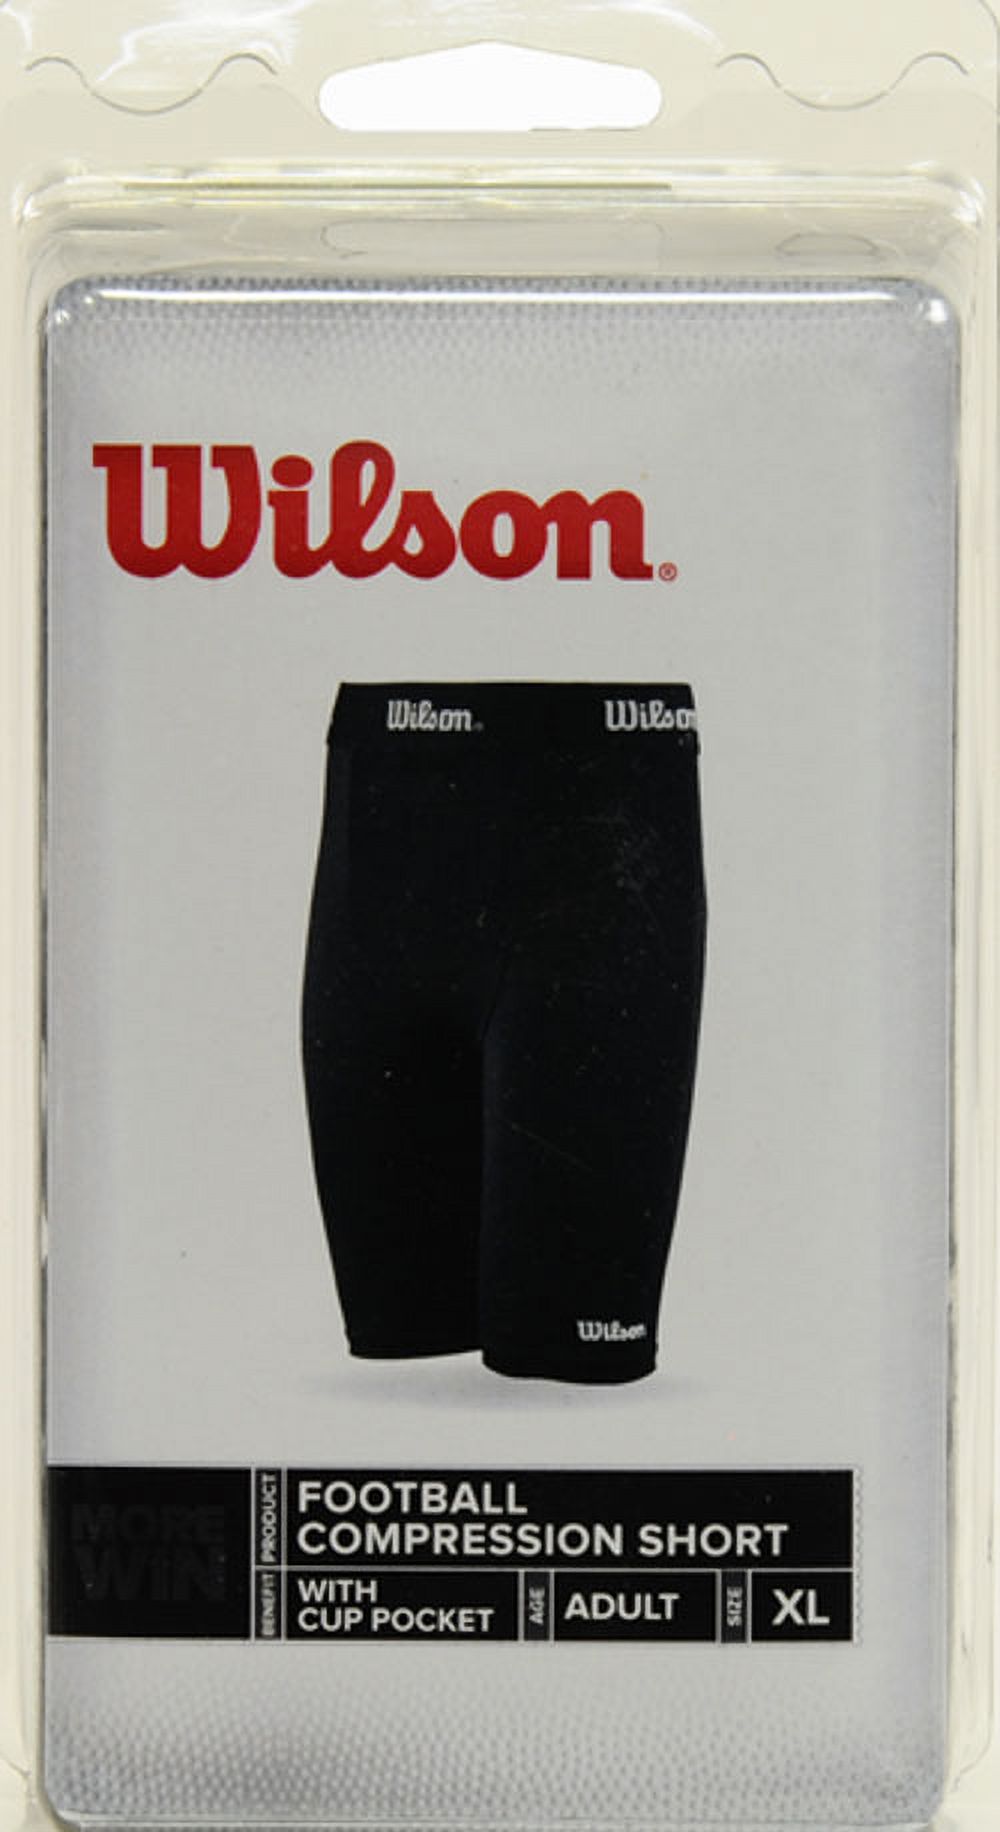 Wilson Adult Football Compression Shorts - image 2 of 2